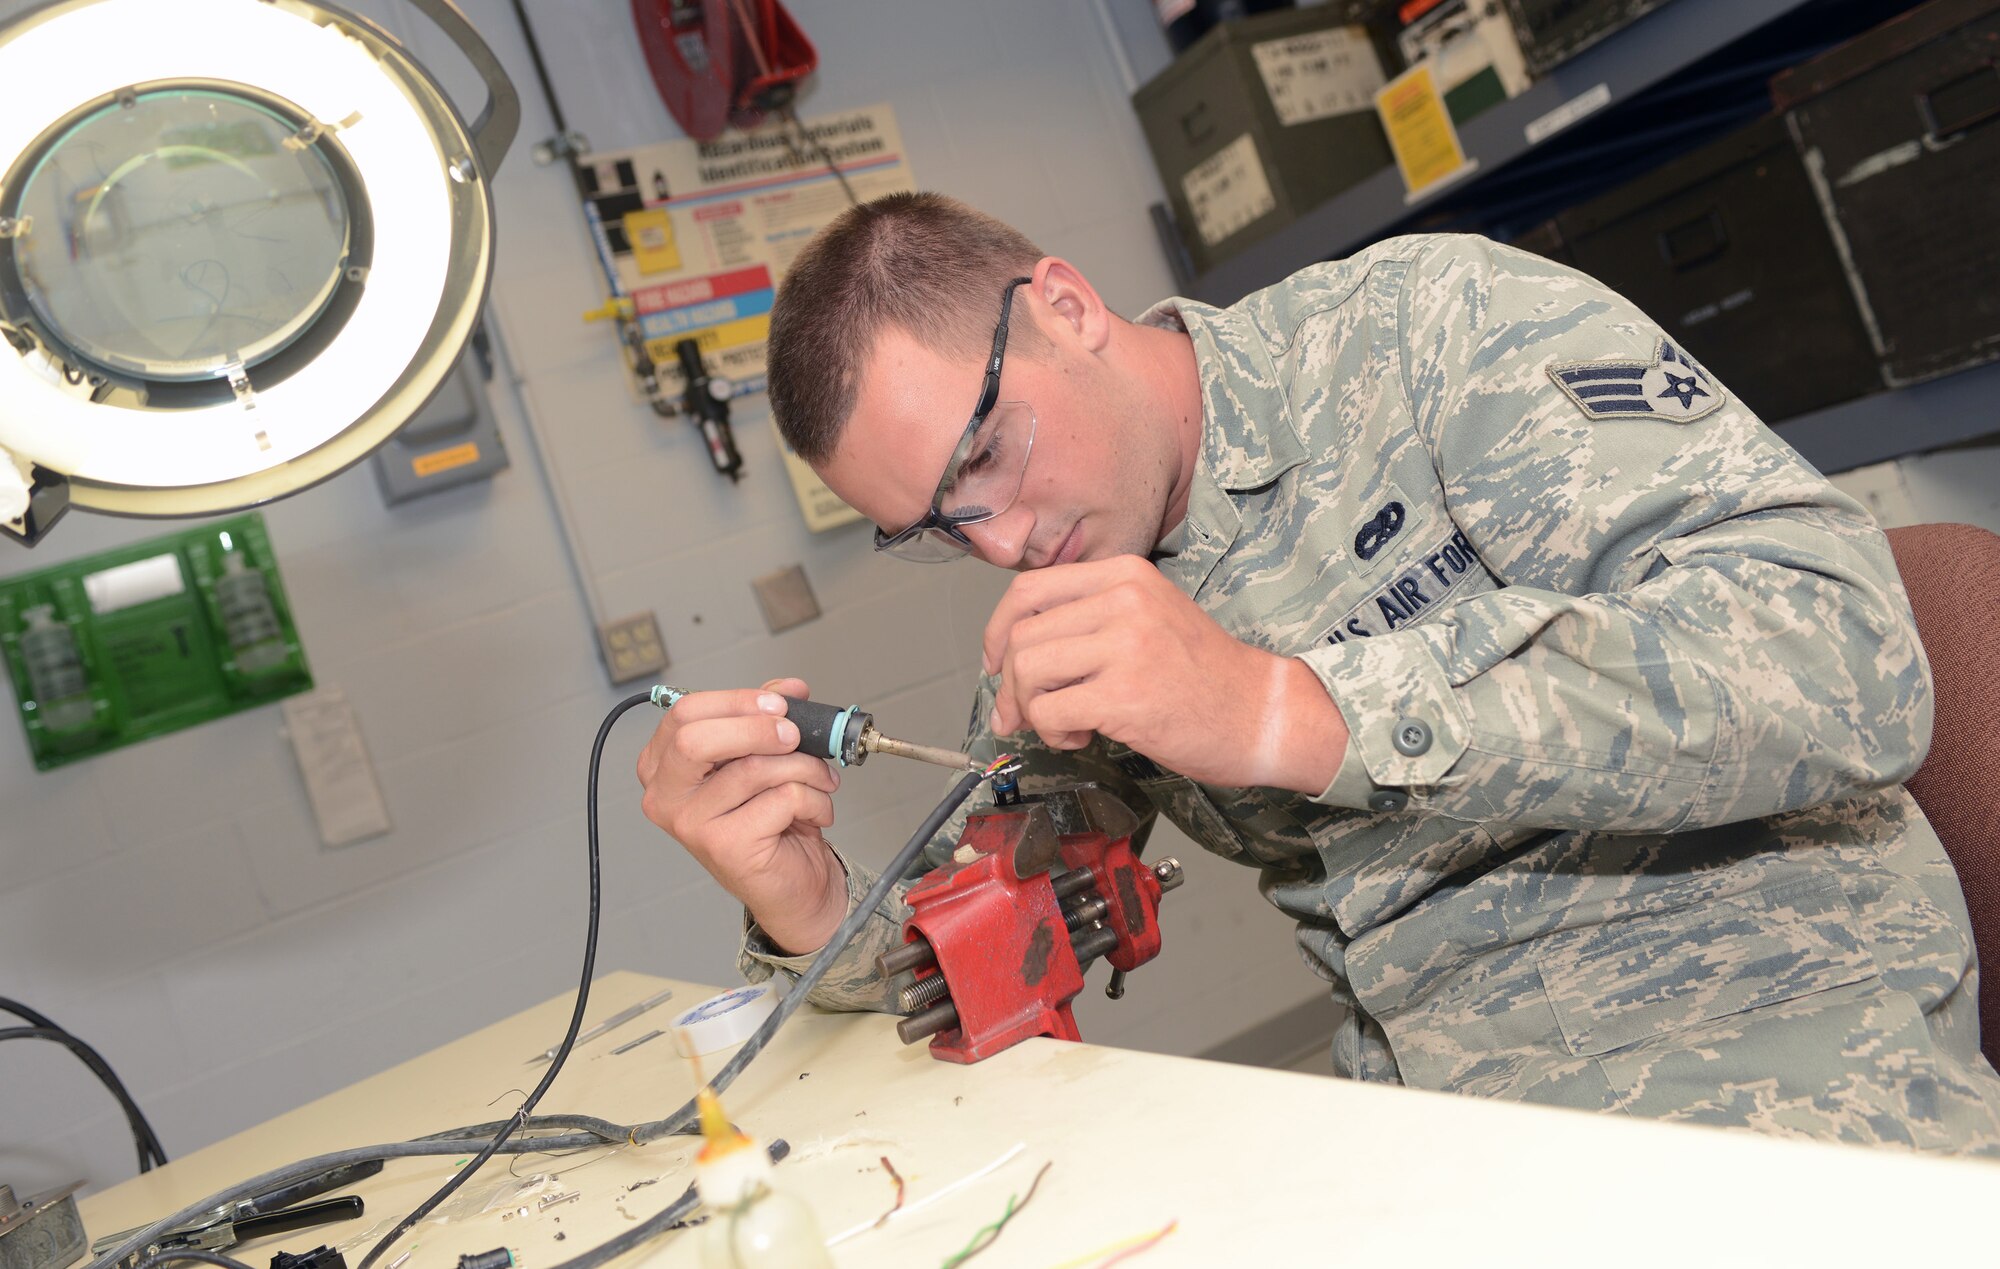 Senior Airman Michael Considine, an Avionics Specialist with the 185th Air Refueling Wing, Iowa Air National Guard, solders a connector to the end of a communications cable that will be used as part of a KC-135 interphone, on August 1, 2014. (U.S. Air National Guard photo by Master Sgt. Vincent De Groot/Released)